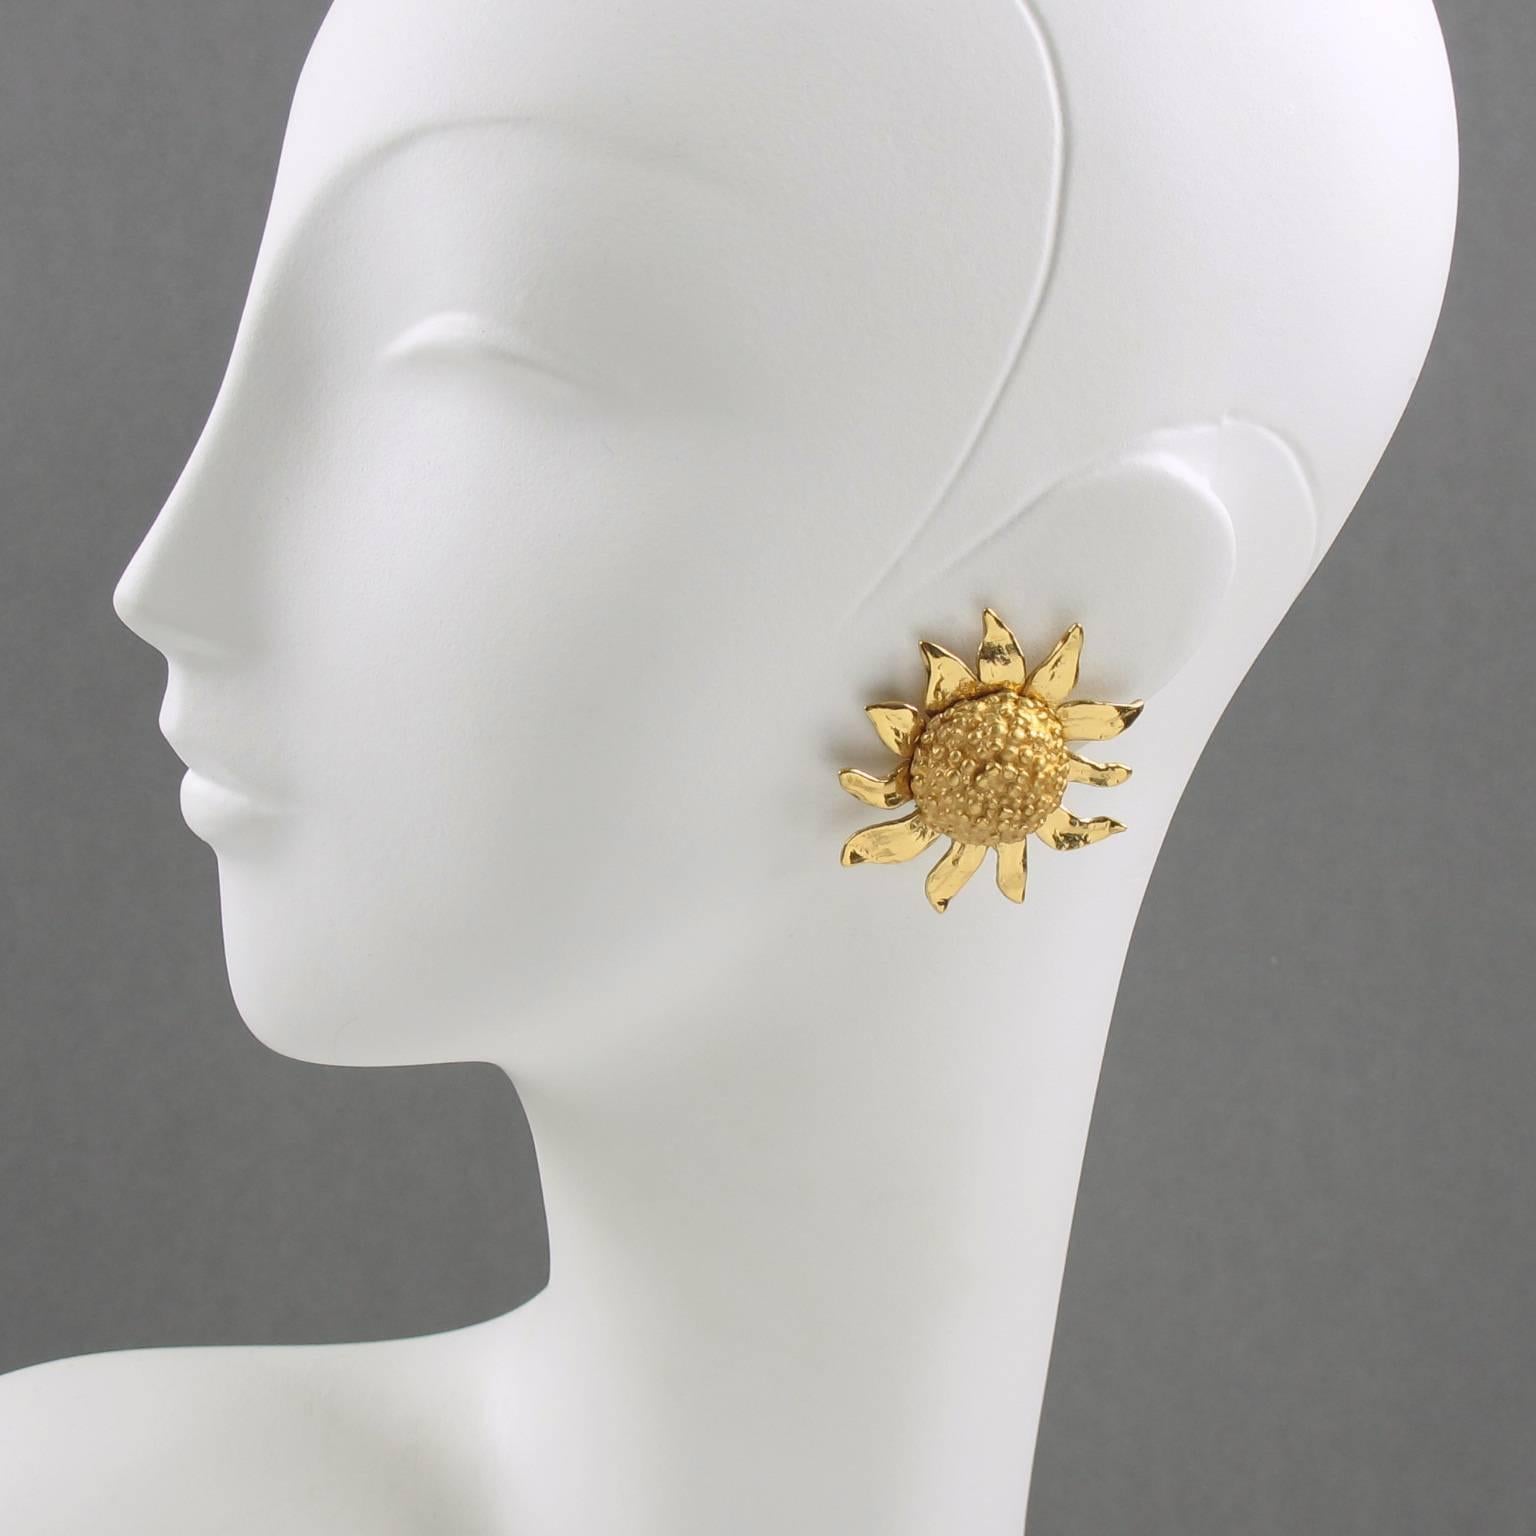 Lovely 1980s Yves Saint Laurent YSL Paris signed clip on earrings. Oversized dimensional elegant sunflower, gilt metal all textured and carved. Engraved on clasp 